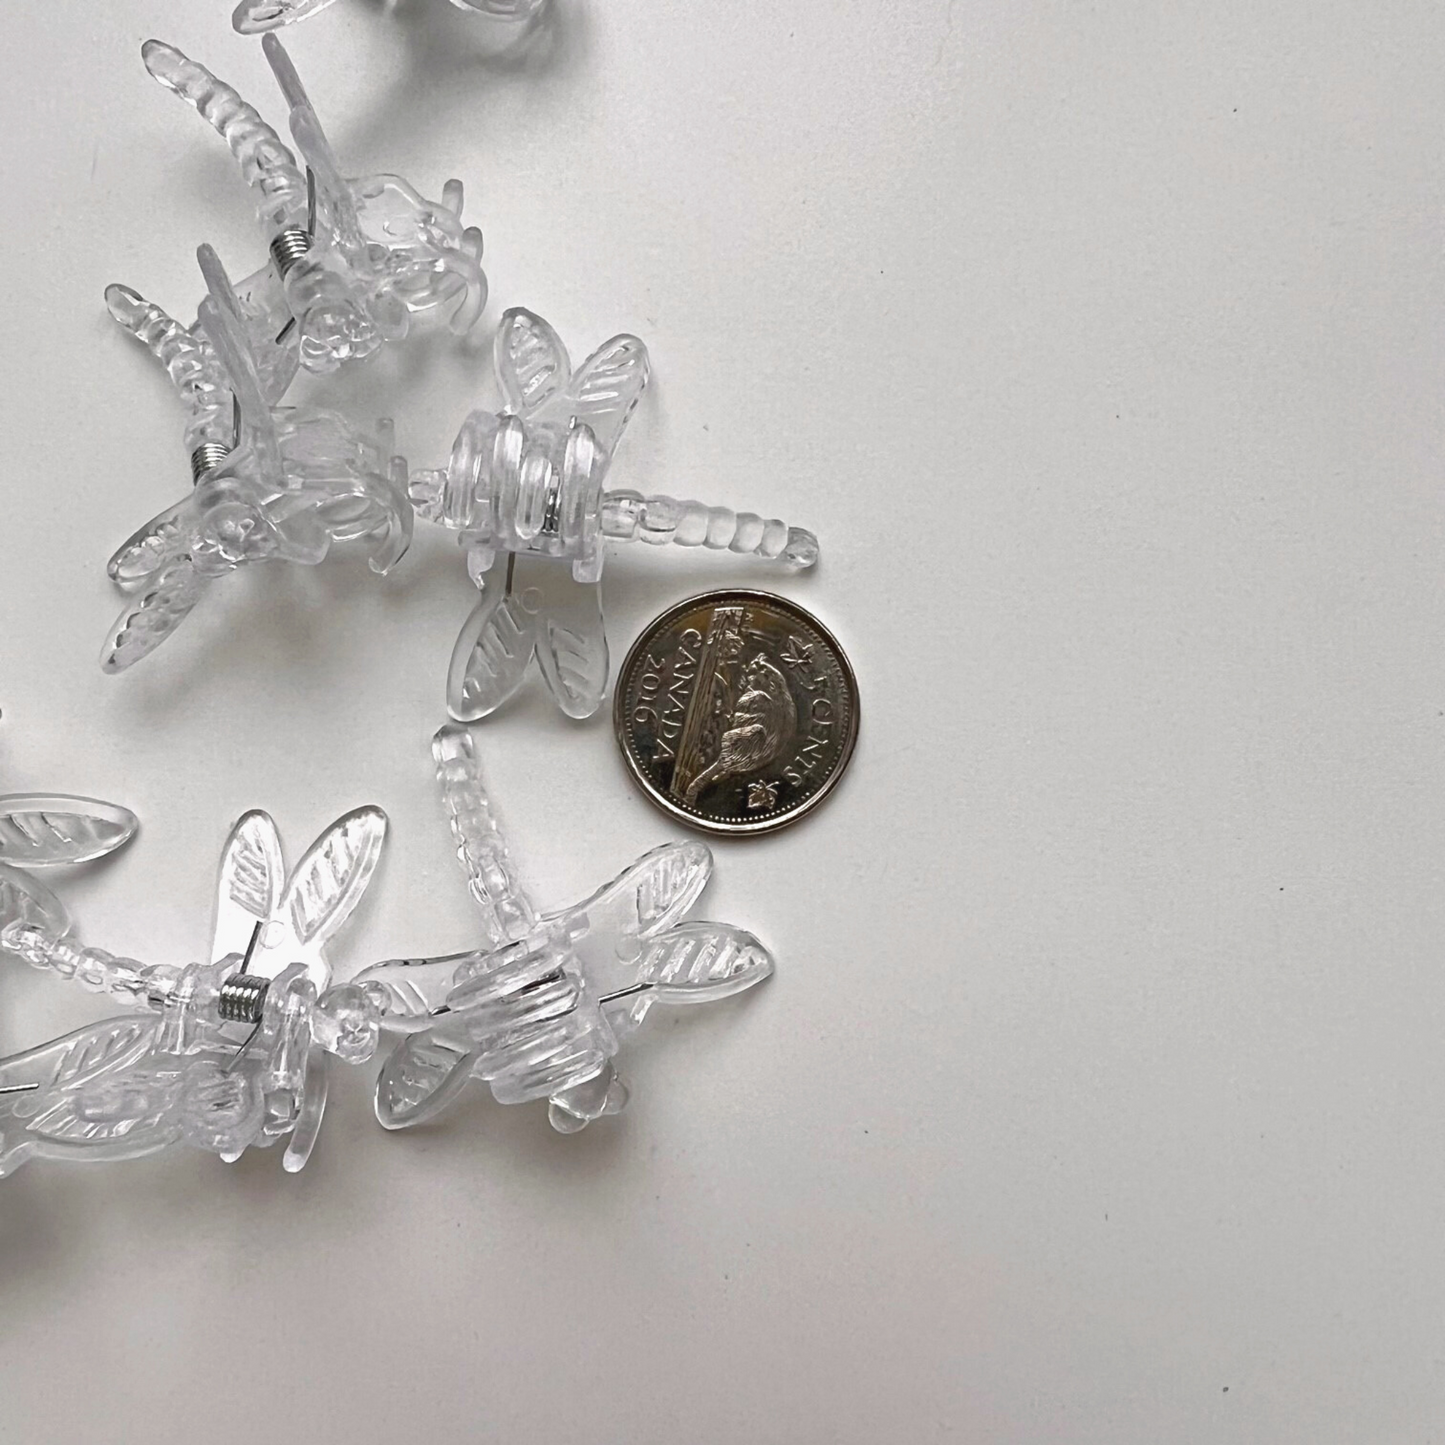 Our dragon fly clips beside a 5 cent coin